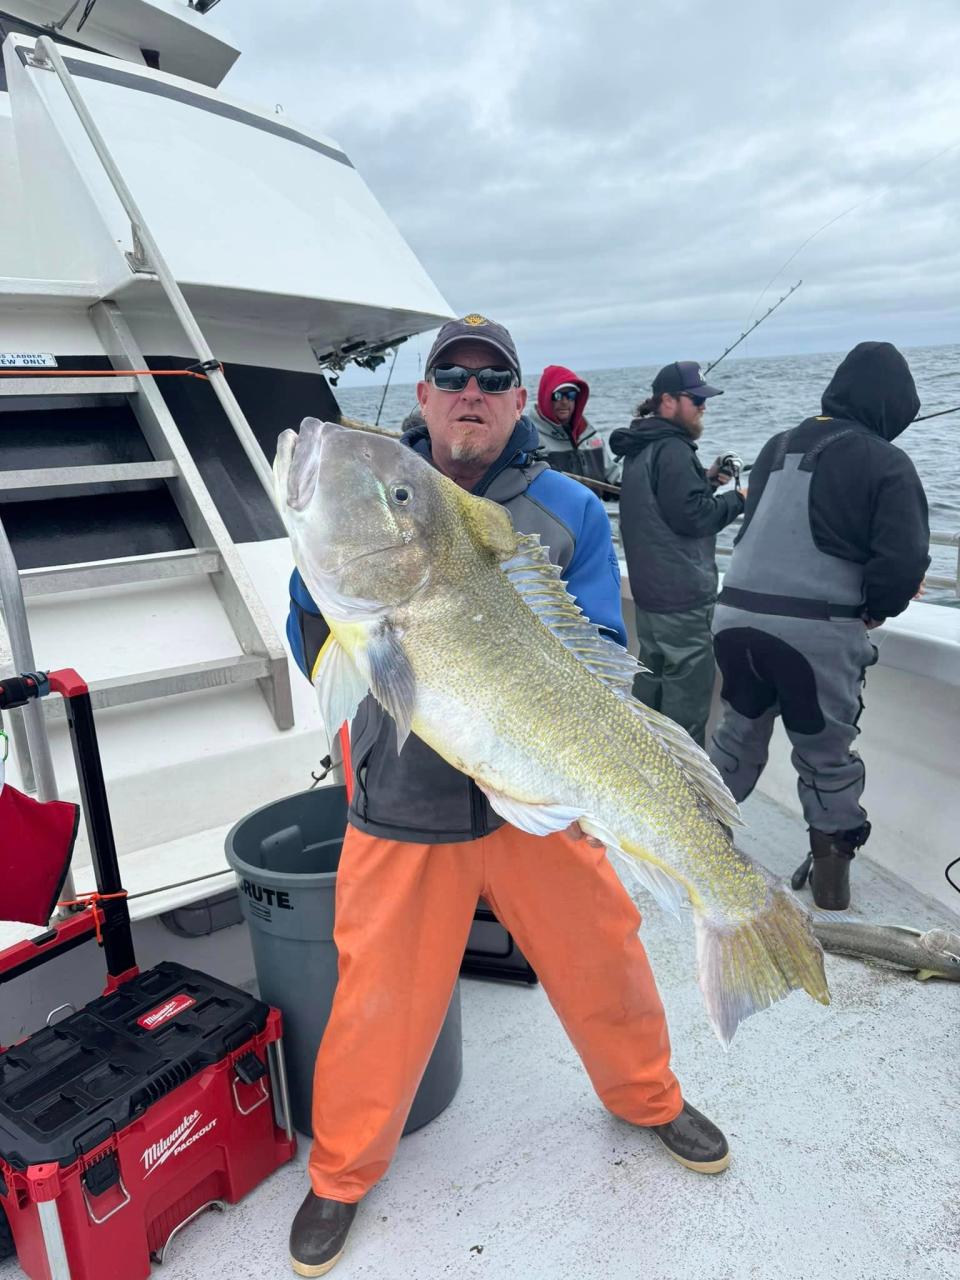 Steve Hagerman of Manchester holds a 45-pound golden tilefish he caught offshore fishing on the Gambler party boat.